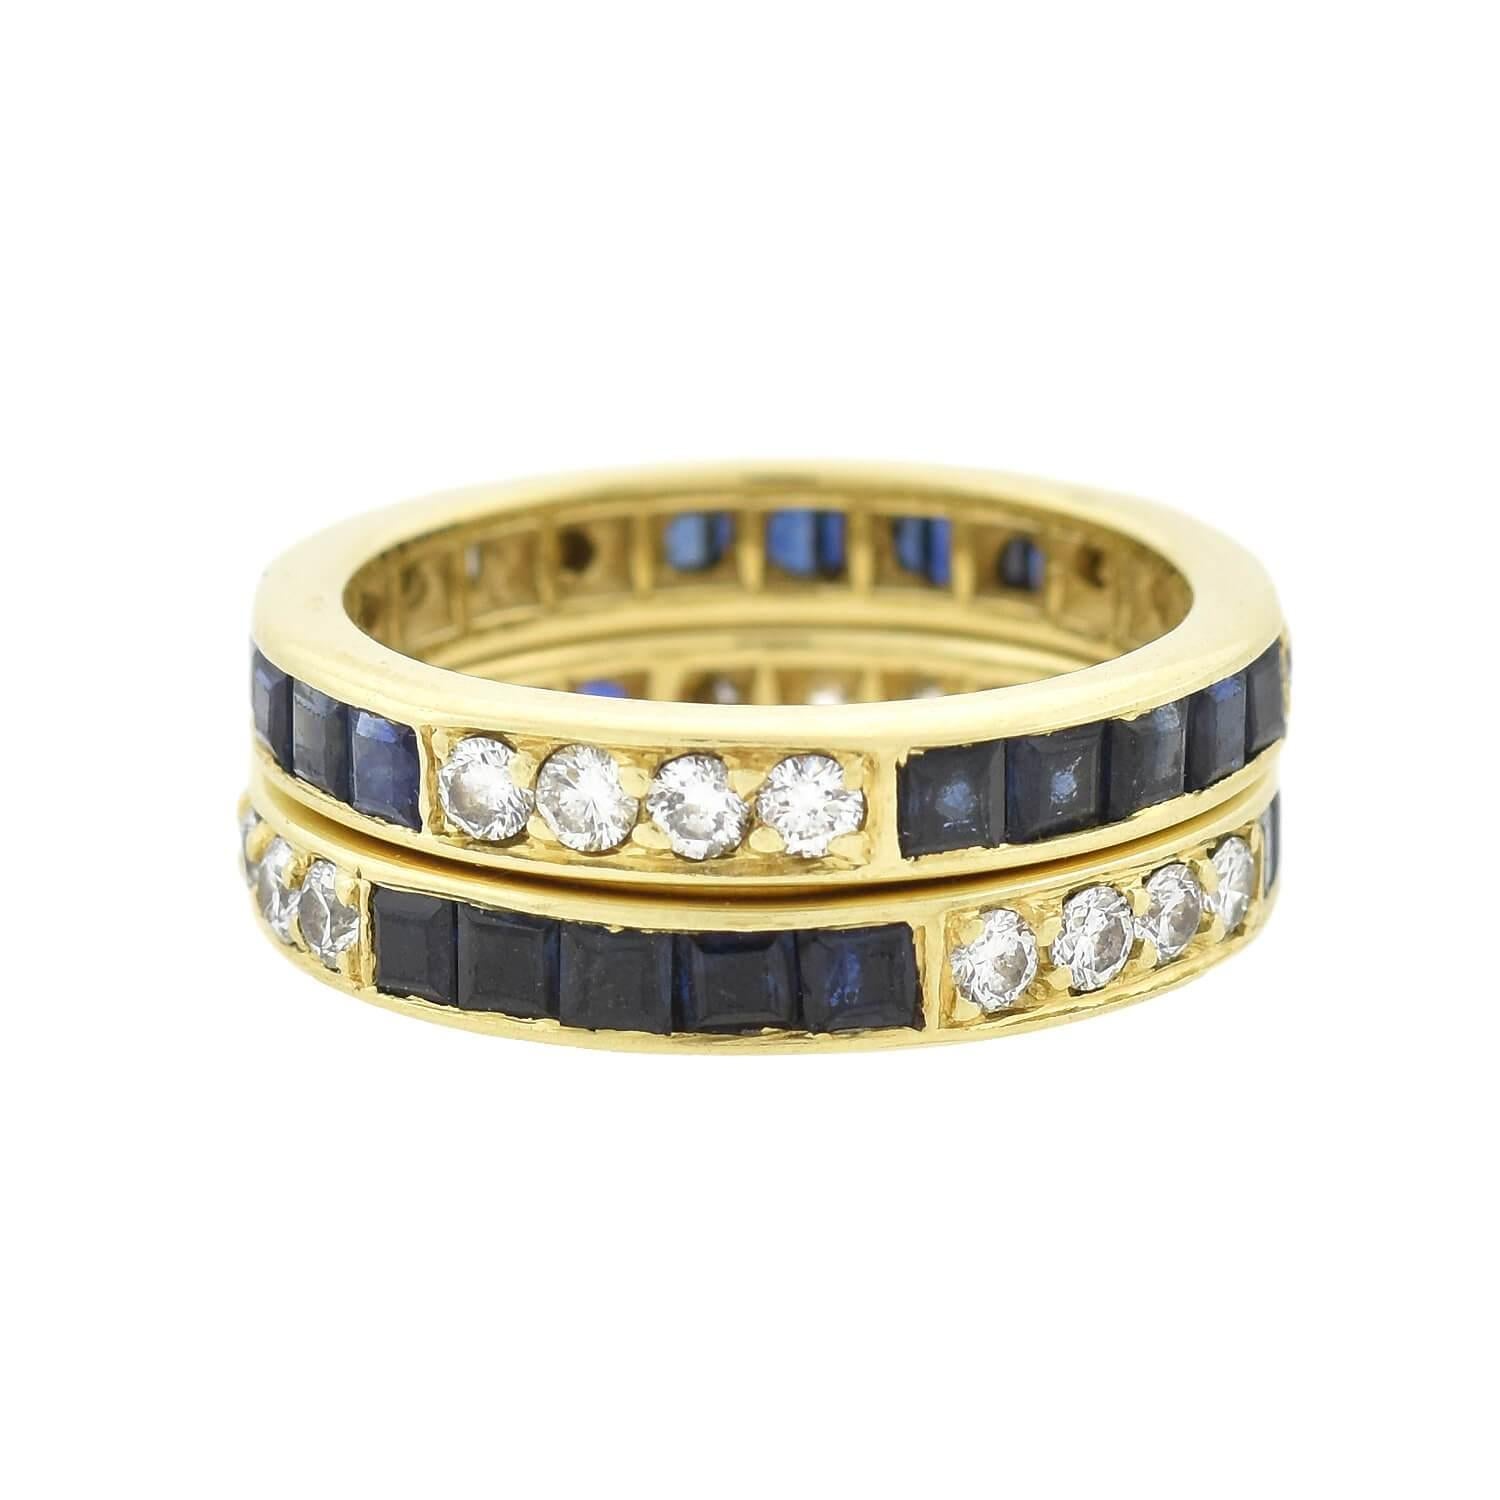 A gorgeous pair of contemporary eternity bands! Handcrafted in vibrant 18kt yellow gold, the two bands feature a total of 3.00ctw of natural, Square Cut sapphires. The lush blue stones are complemented by a total of 0.72ctw of sparkling G/H color,